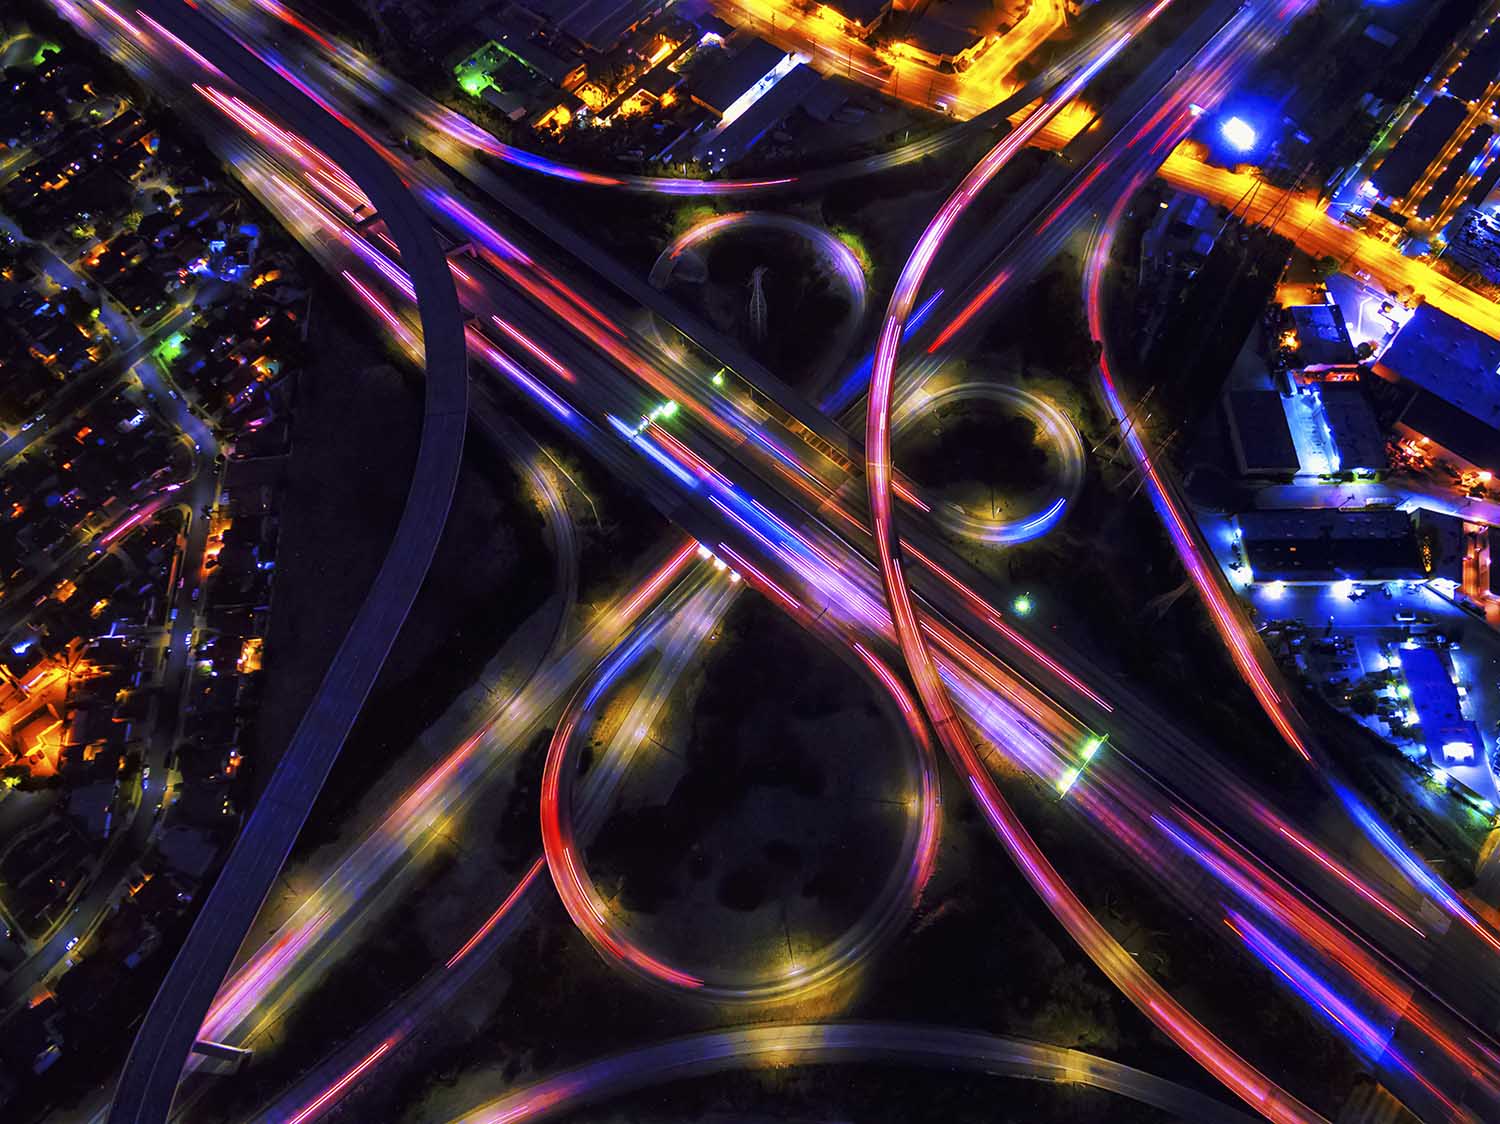 infinity-intersection-an-aerial-view-of-the-freew-2021-08-28-08-40-27-utc.jpg